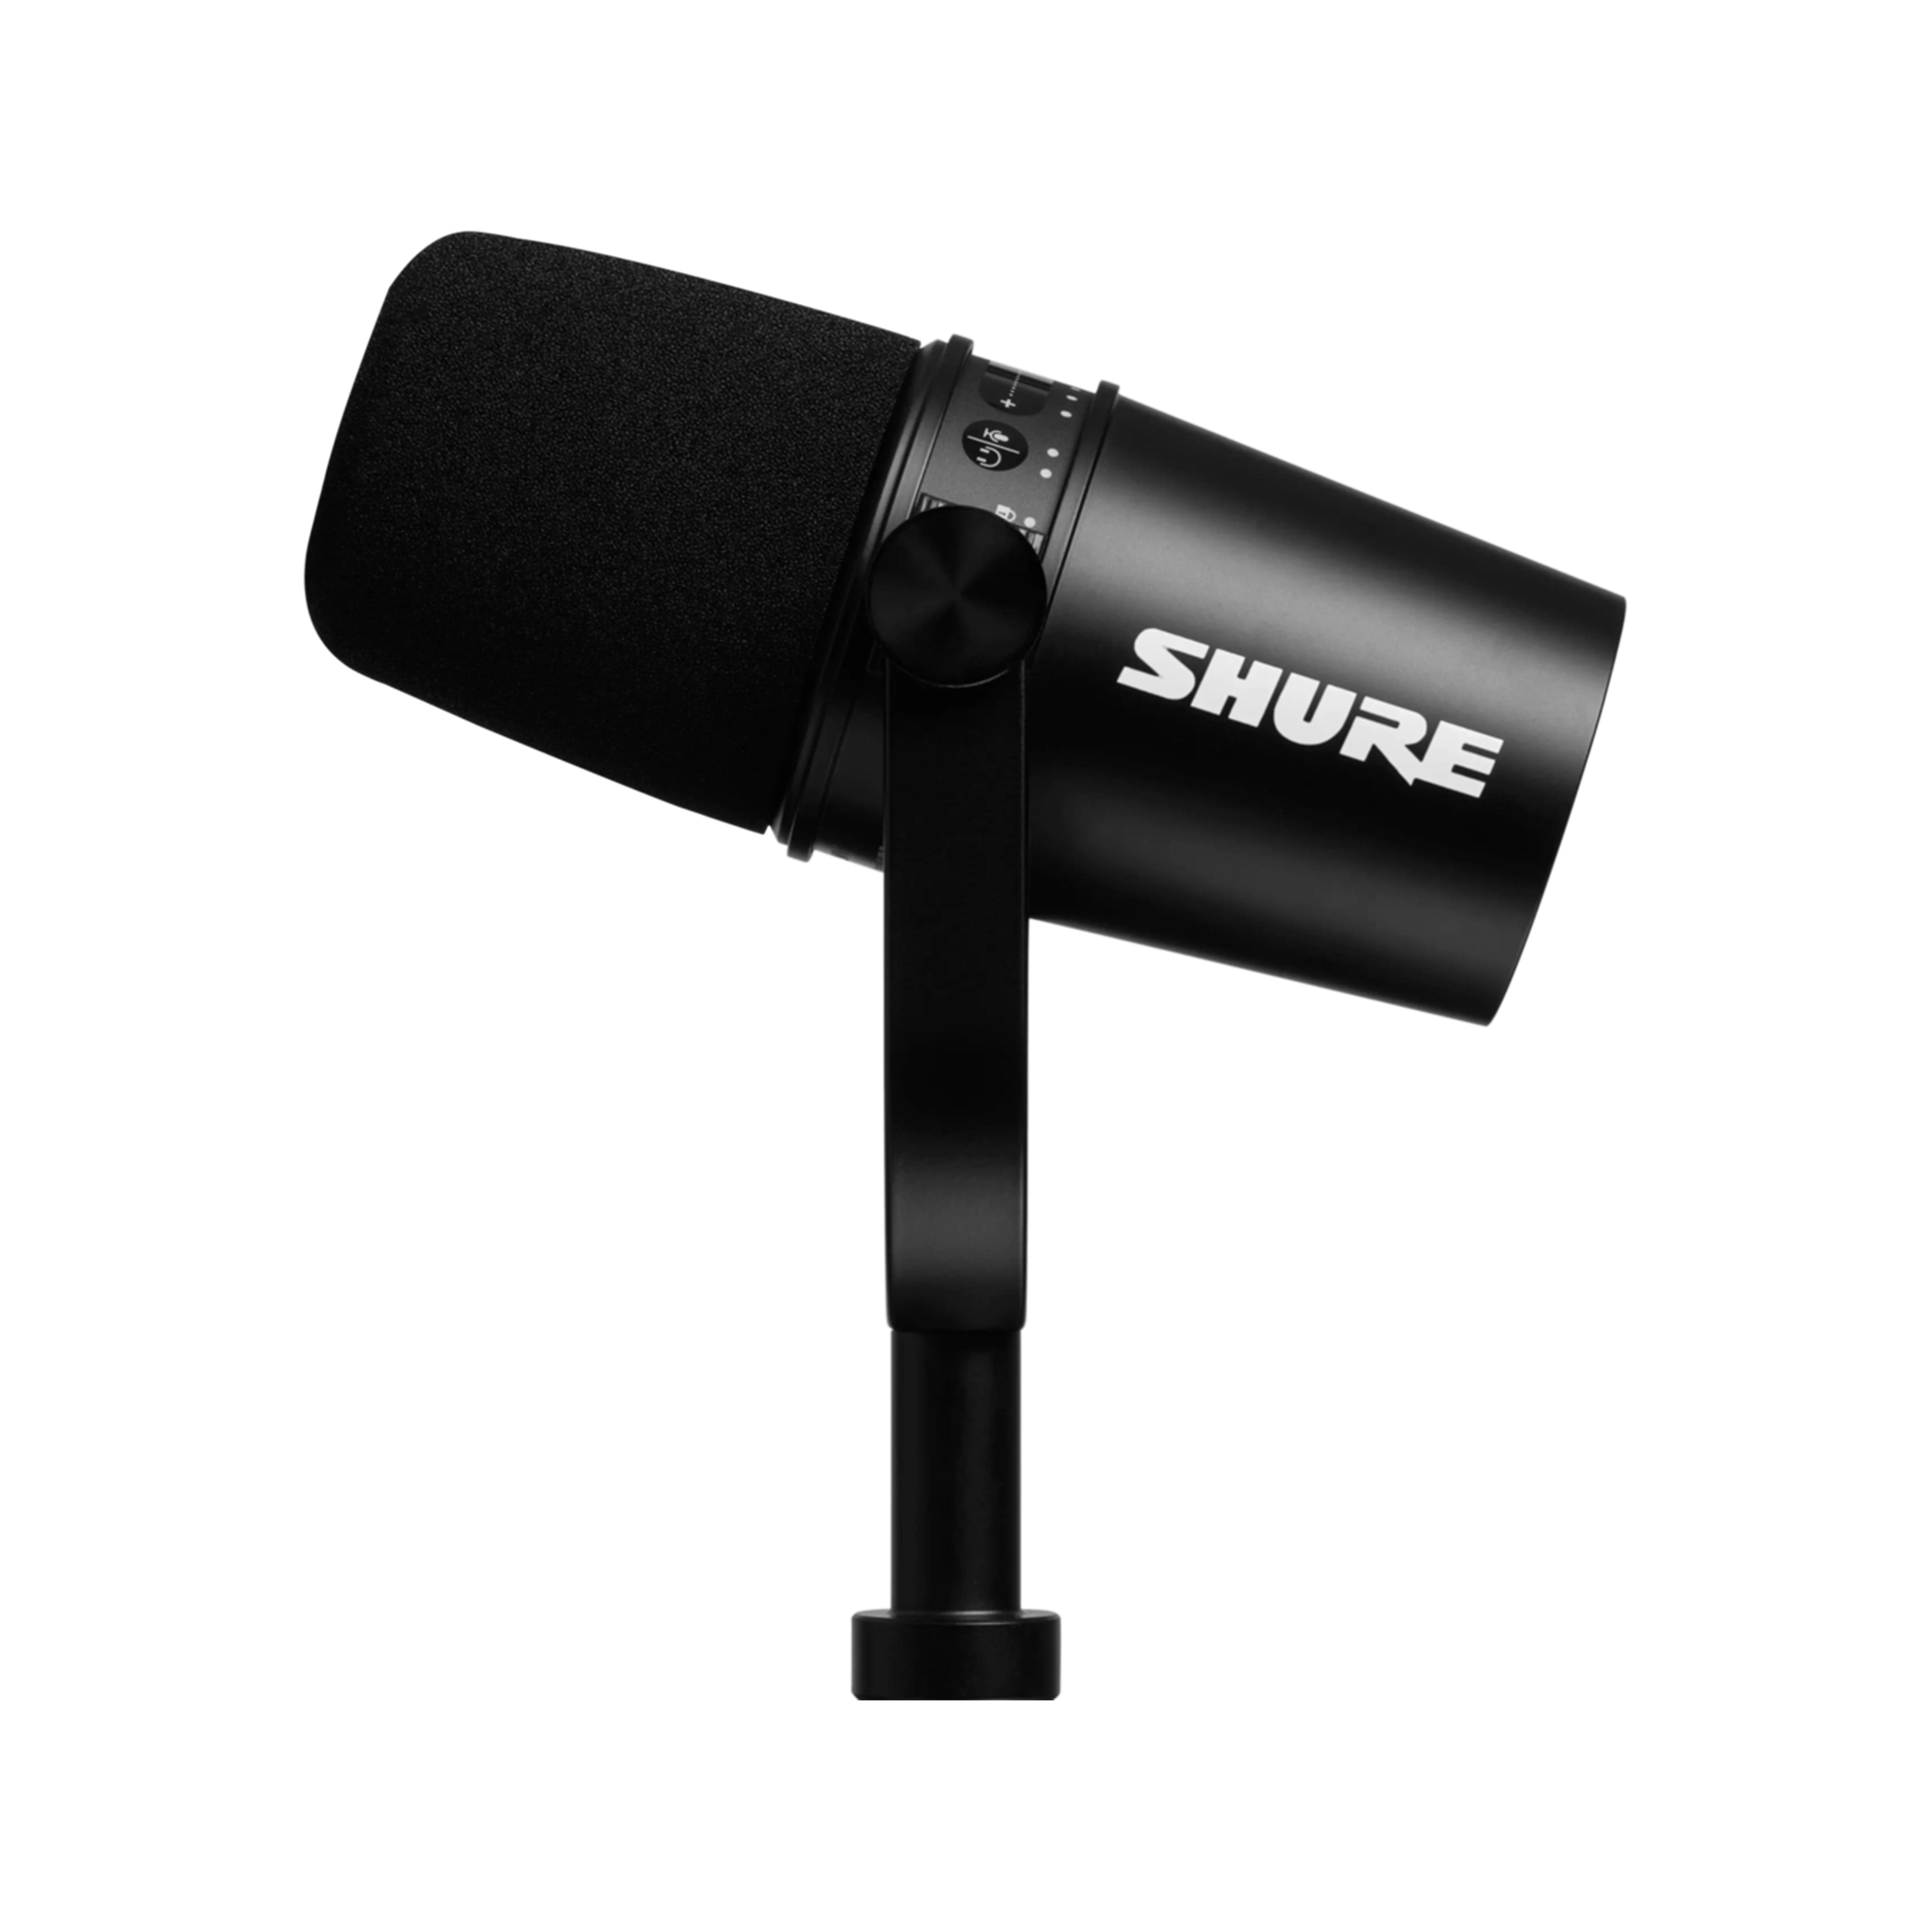 Shure MV7 USB Podcast Microphone with Stand